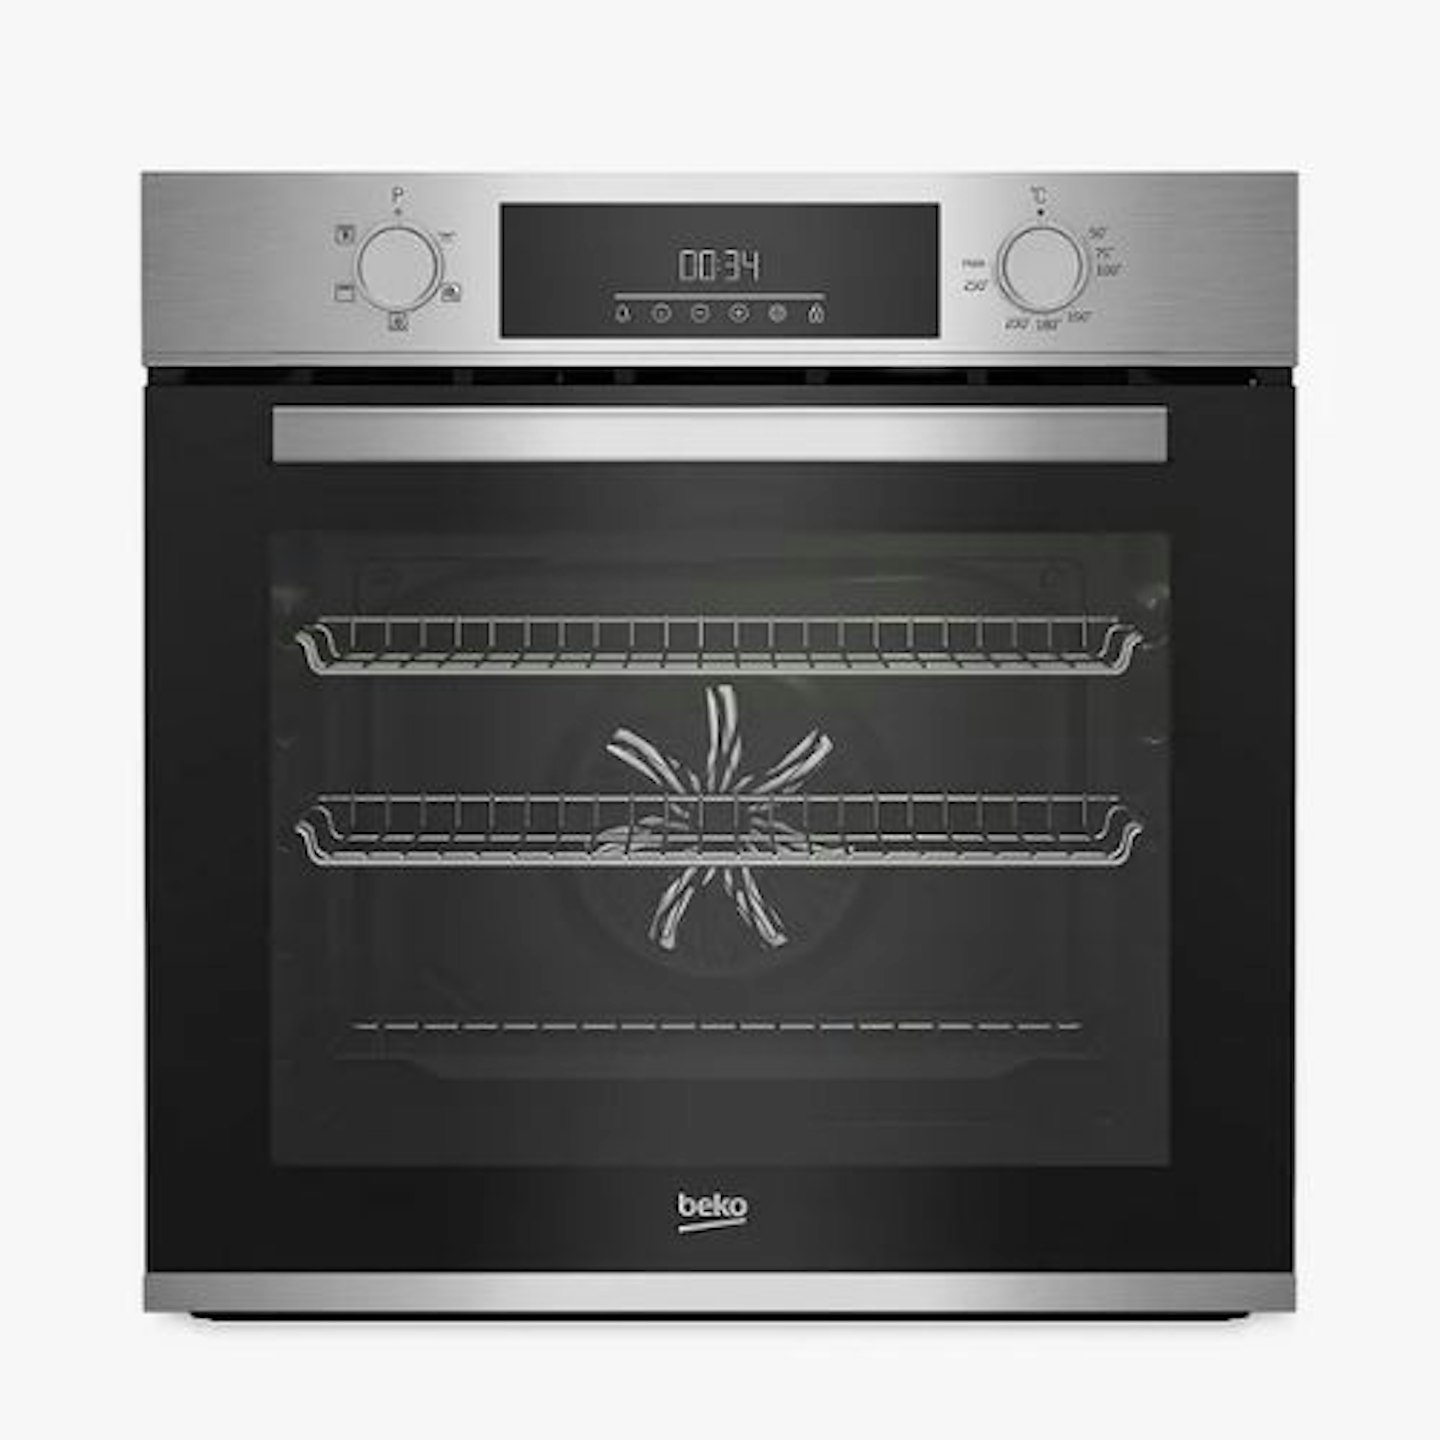 Beko BBAIF22300X Built In Single Electric Oven, Stainless Steel